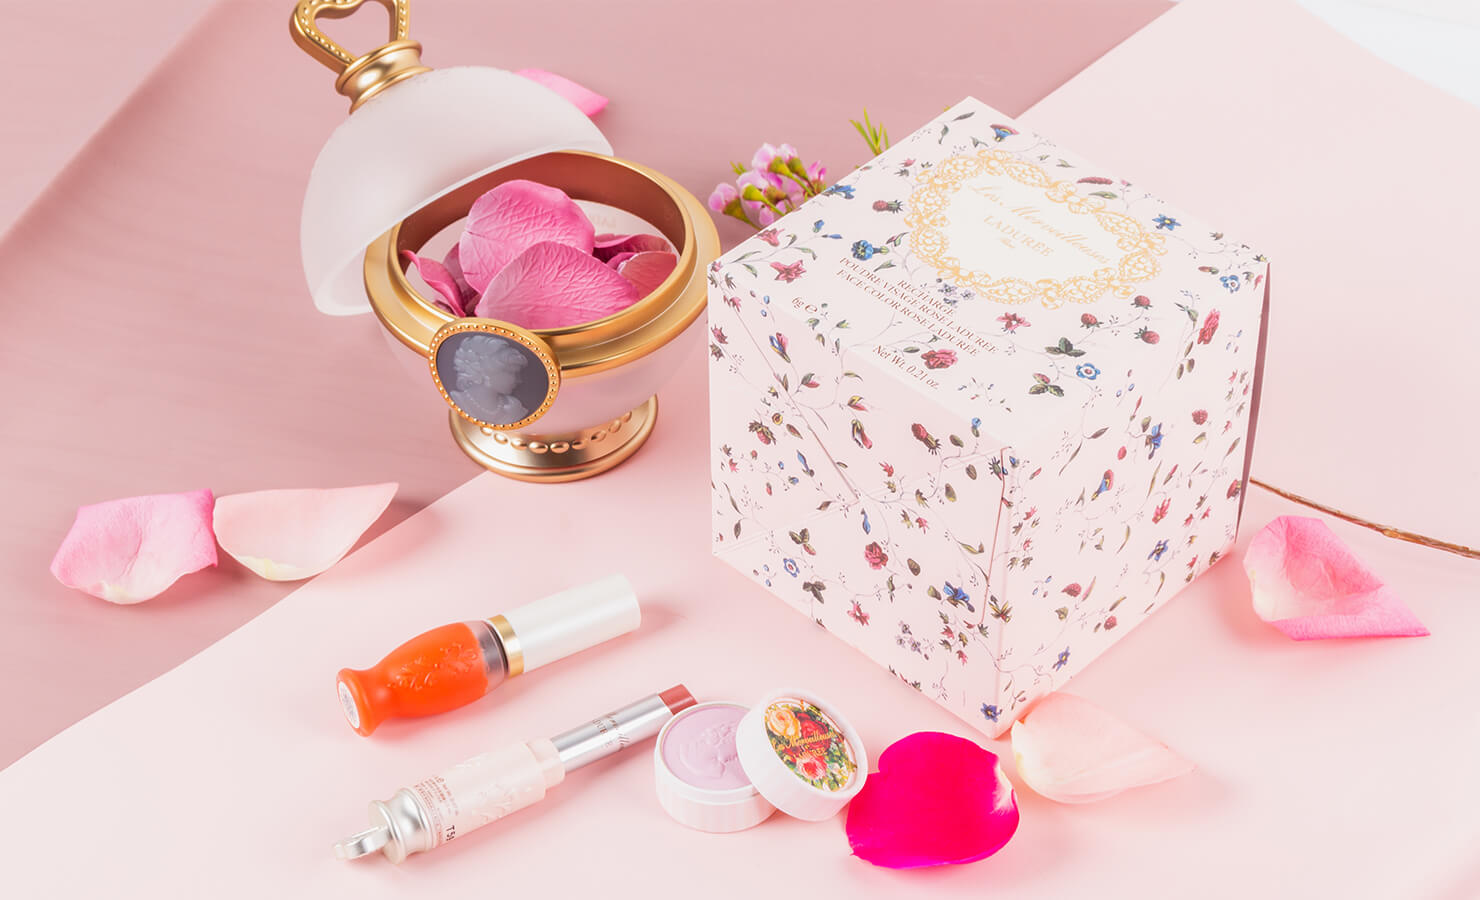 The prettiest makeup collection ever